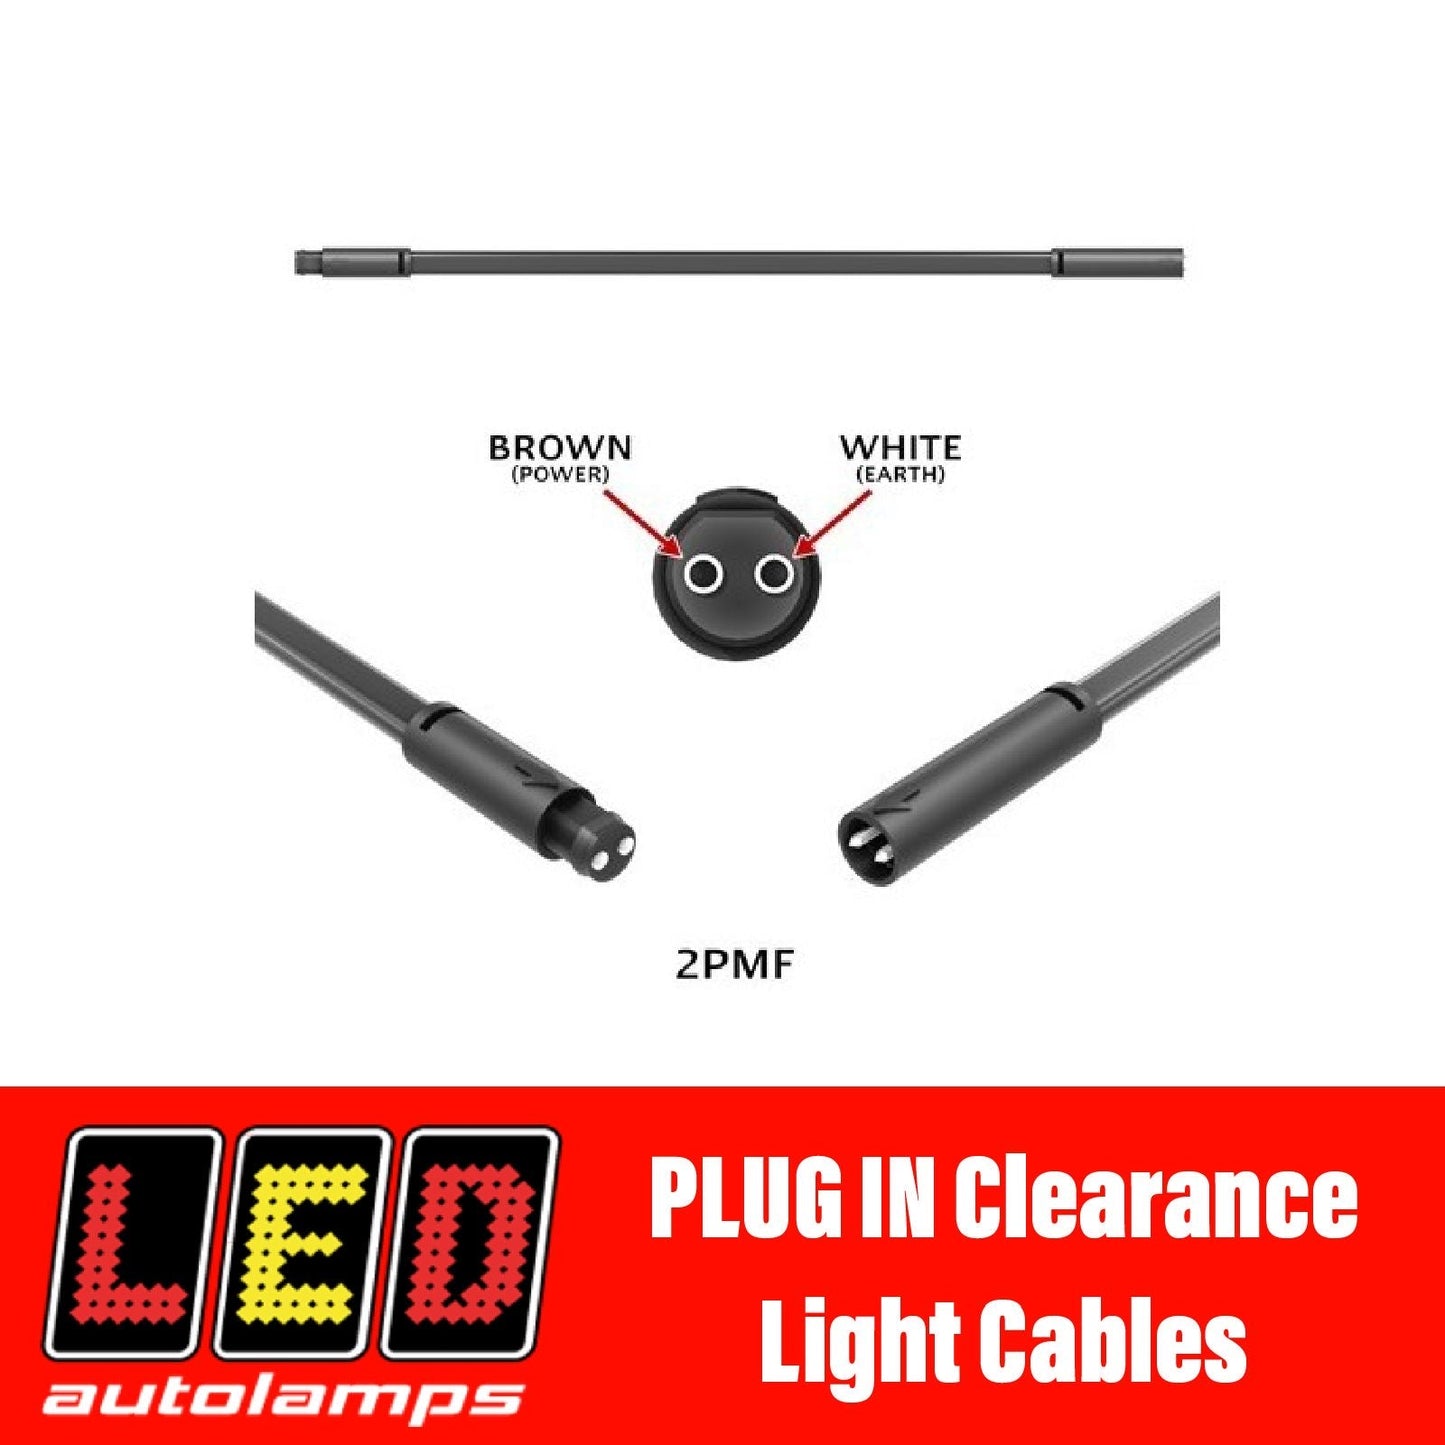 LED AUTOLAMPS PLUG IN CLEARANCE LIGHT WIRING 3 METRE